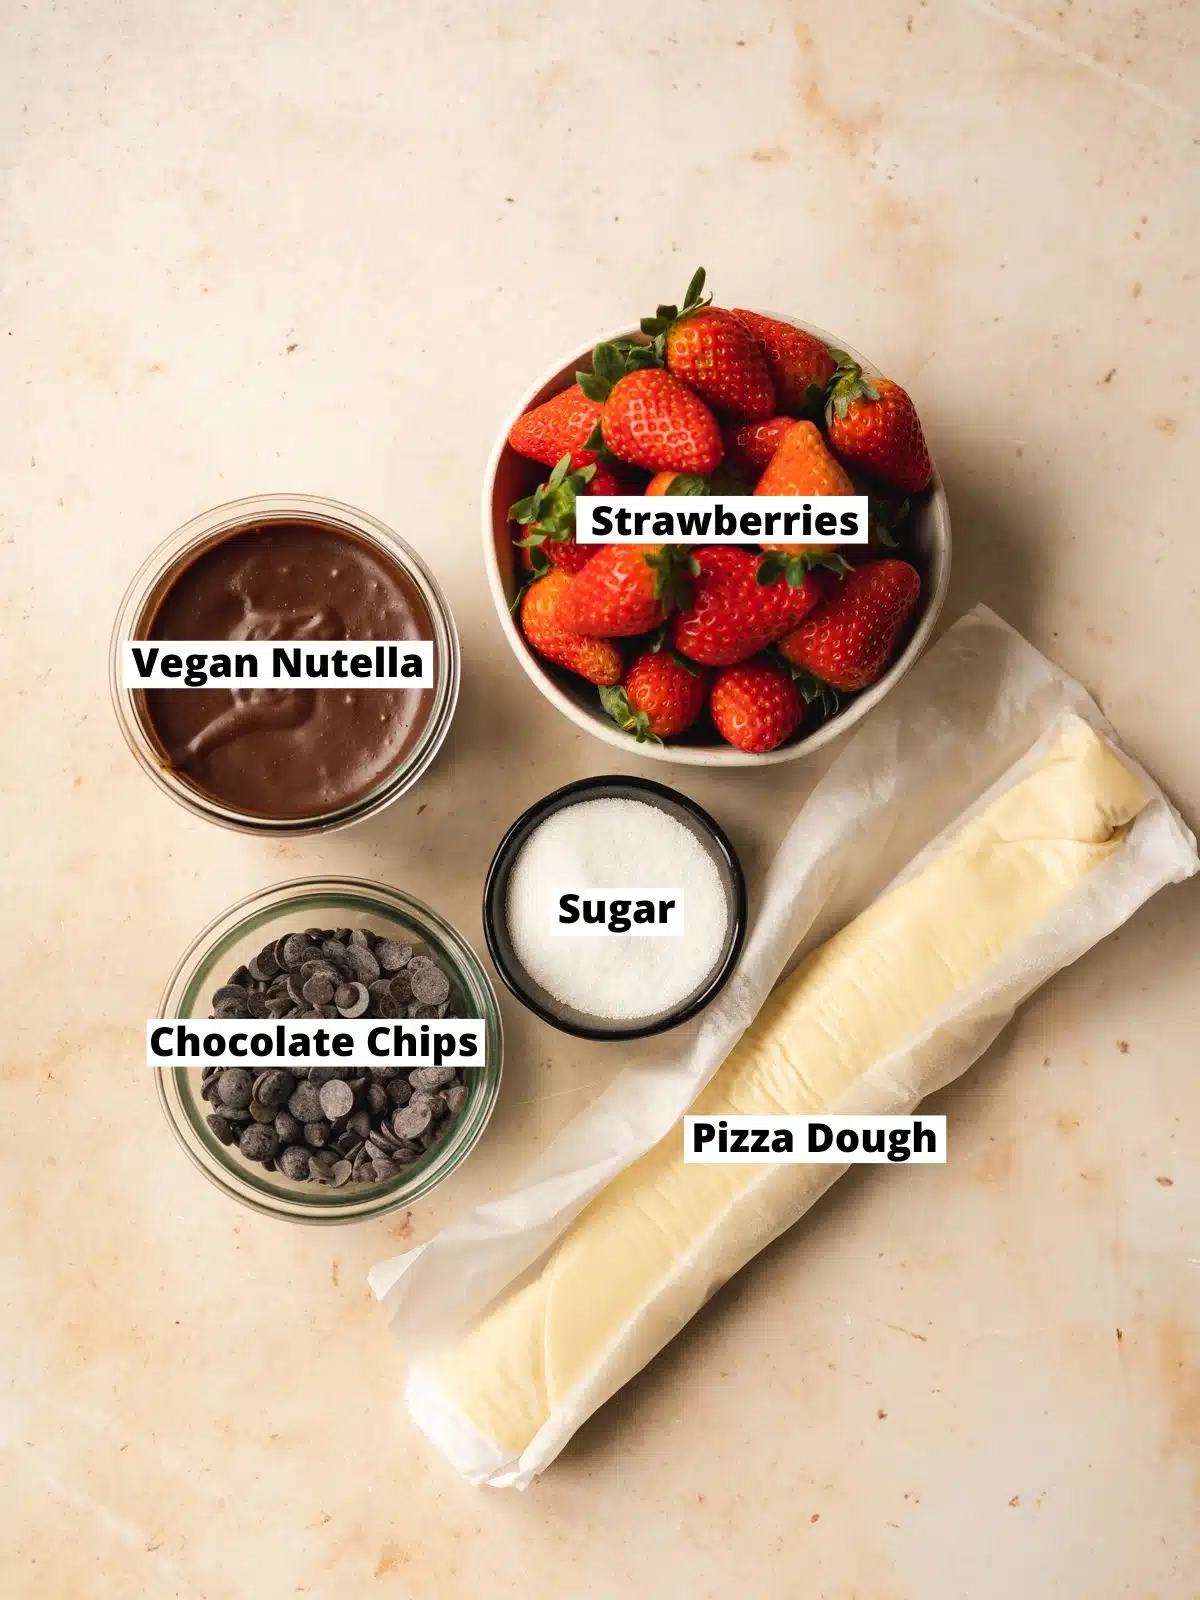 ingredients to make chocolate pizza measured out in bowls on a marble surface.